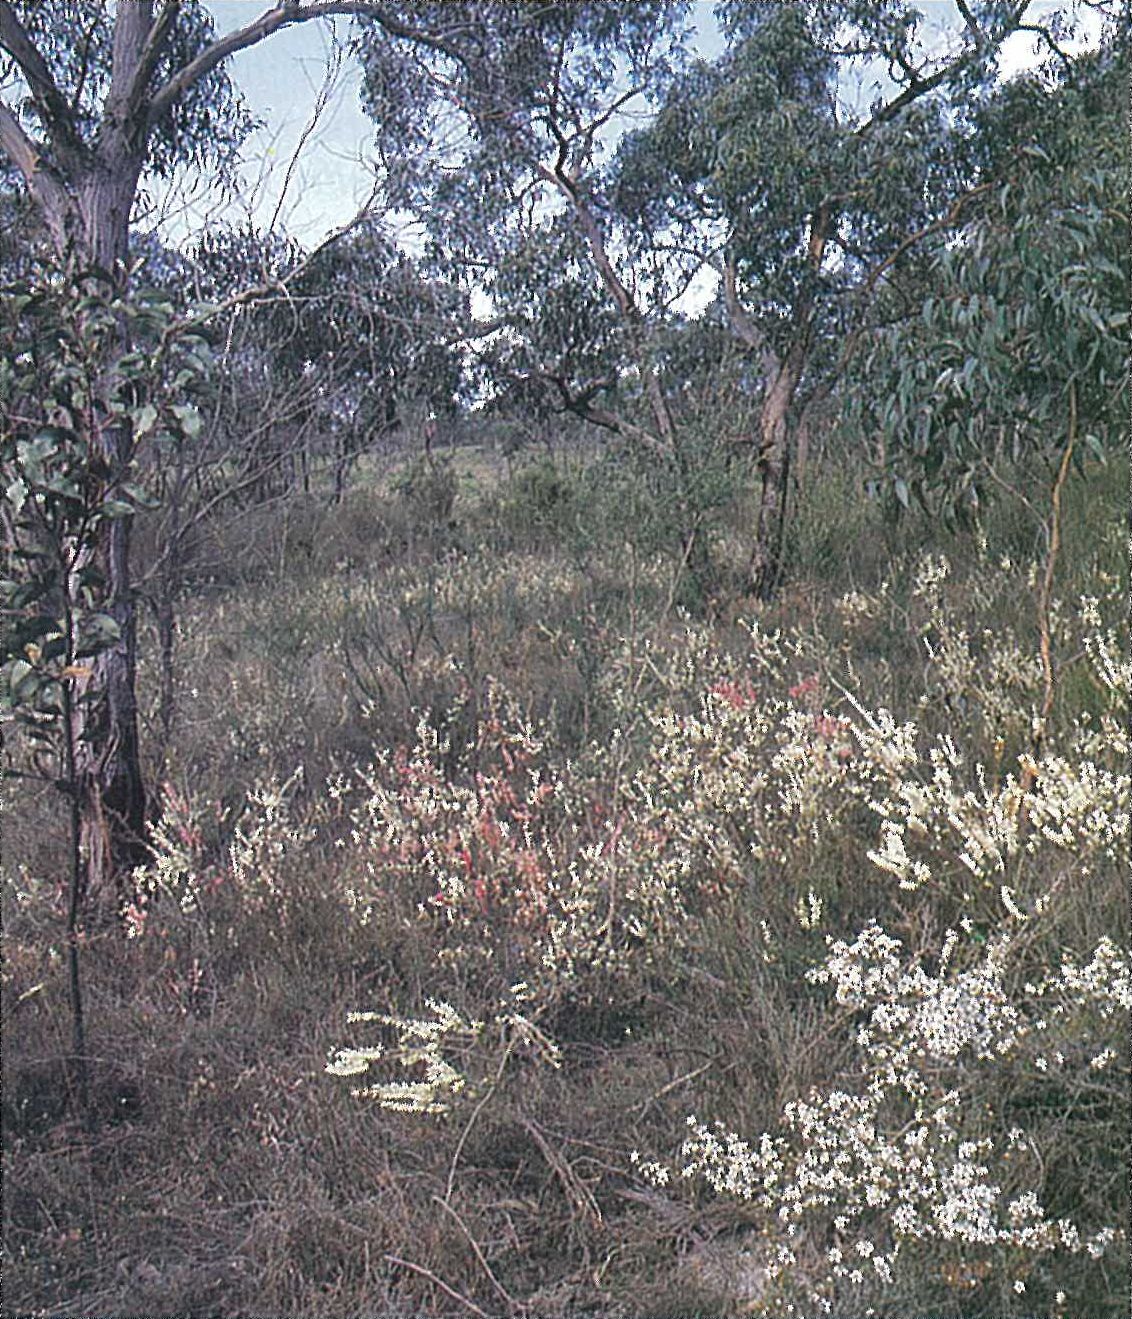 Victoria Volcanic Plain; open-forest on stony rises. Eucalyptus ovata and E. viminalis woodland to open-forest, with Acacia melanoxylon and understorey species Cassinia aculeata, Pteridium exculentum and Senecio lautus surrounding small crater lake, with Carex appressa around margin and Wolffia australiana on surface. Floating Islands Reserve near Camperdown.